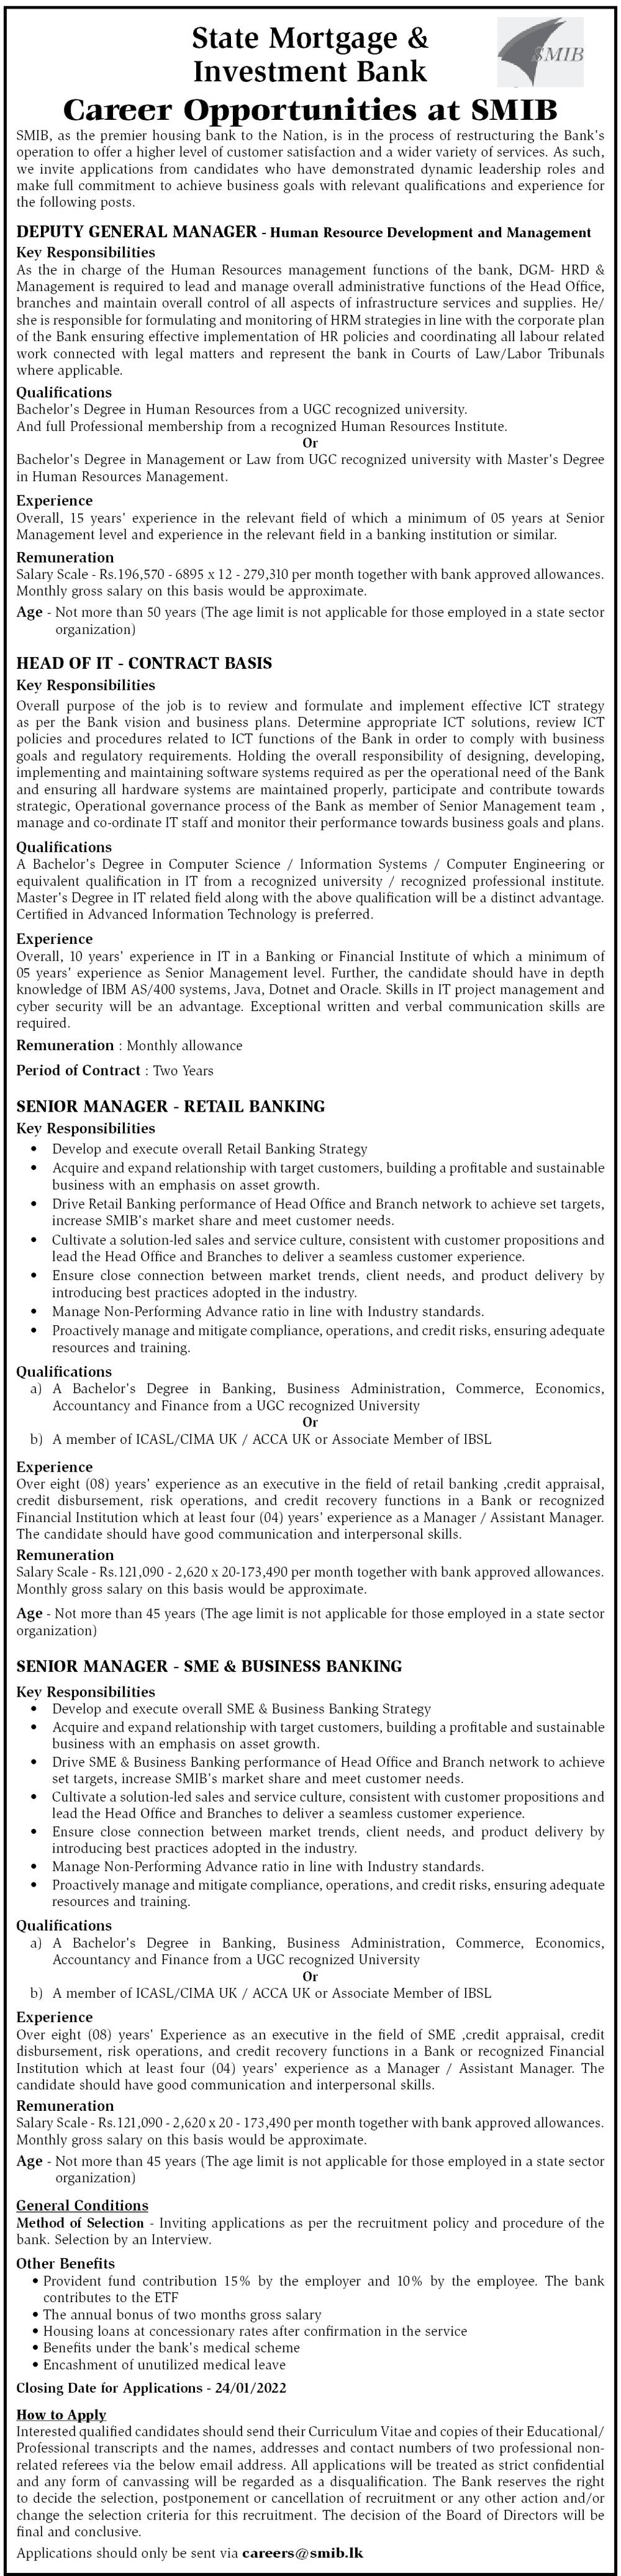 Deputy General Manager, Head of IT, Senior Manager - State Mortgage and investment Bank